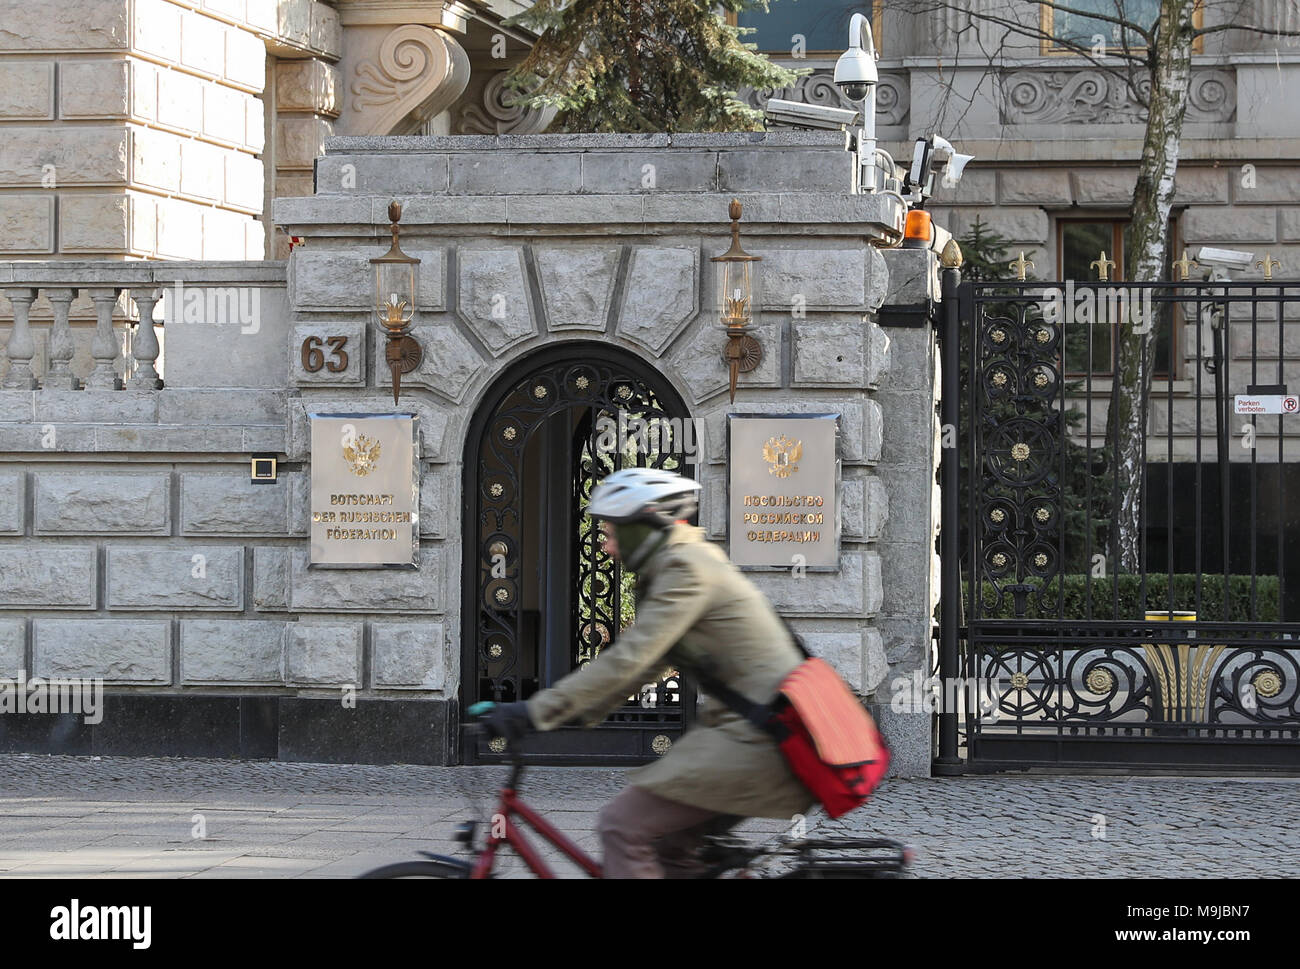 Berlin, Germany. 26th Mar, 2018. A cyclist passes by Russian Embassy in Berlin, capital of Germany, on March 26, 2018. Germany announced Monday that it will expel four Russian diplomats over the poisoning of former double agent Sergei Skripal and his daughter in Britain. Credit: Shan Yuqi/Xinhua/Alamy Live News Stock Photo